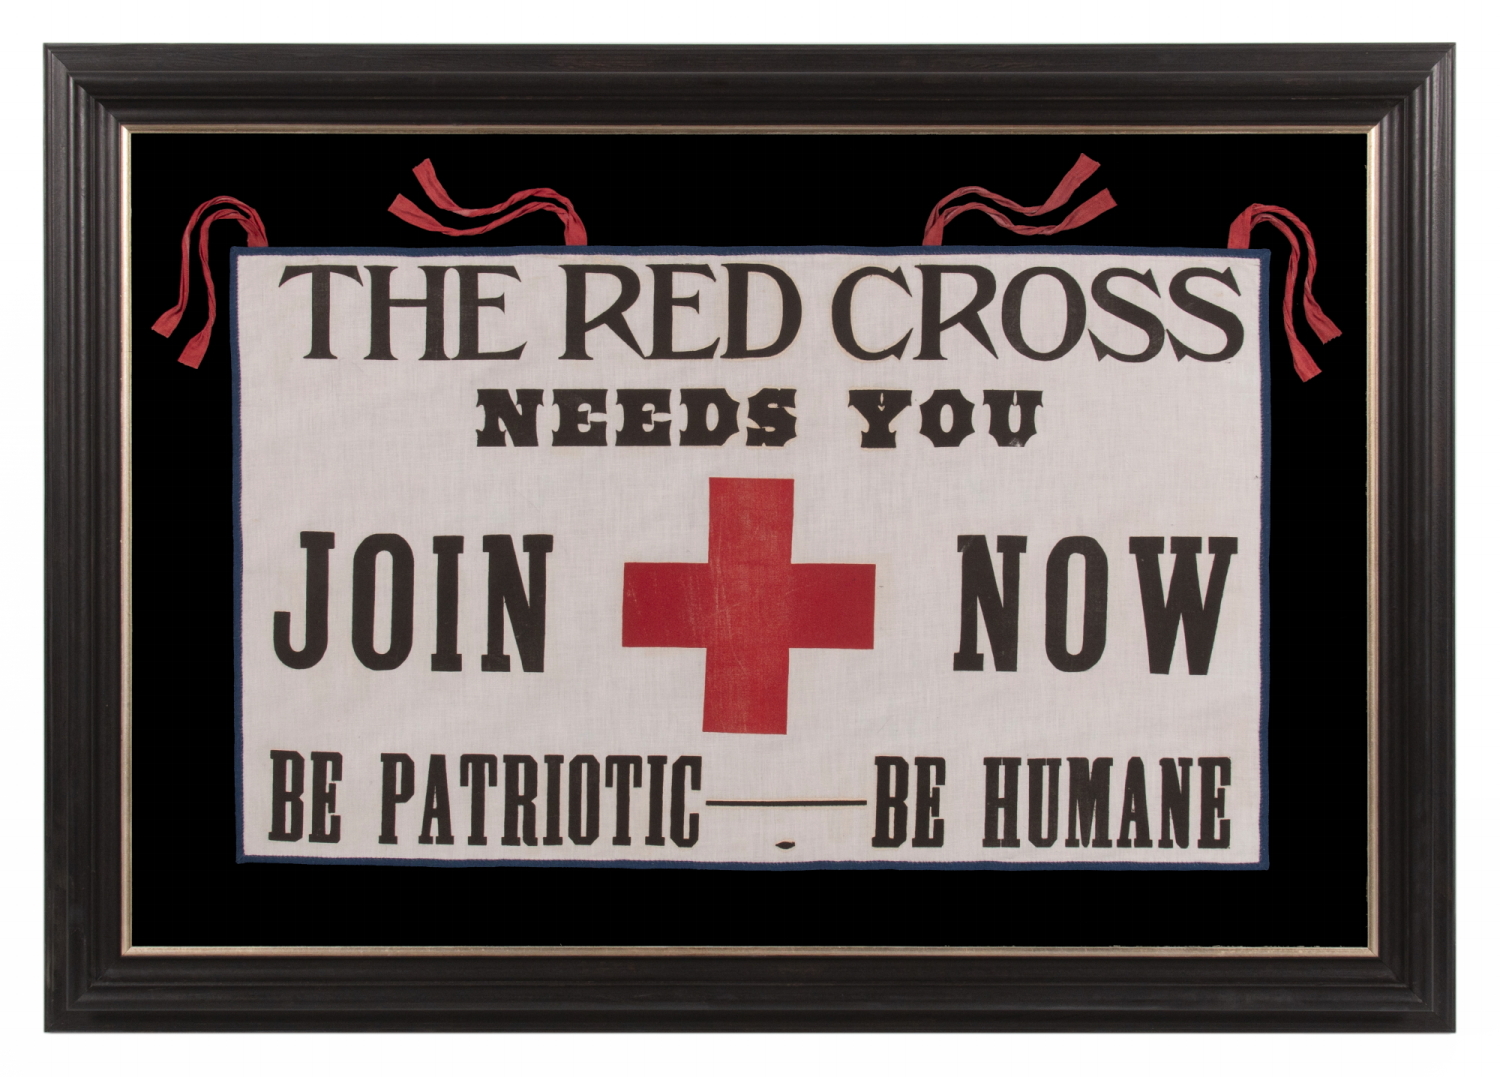 EXCEPTIONAL RED CROSS BANNER WITH WHIMSICAL LETTERING AND A TERRIFIC SLOGAN, WWI (U.S. INVOLVEMENT 1917-18), ONE OF APPROXIMATELY THREE EXAMPLES PRESENTLY IDENTIFIED